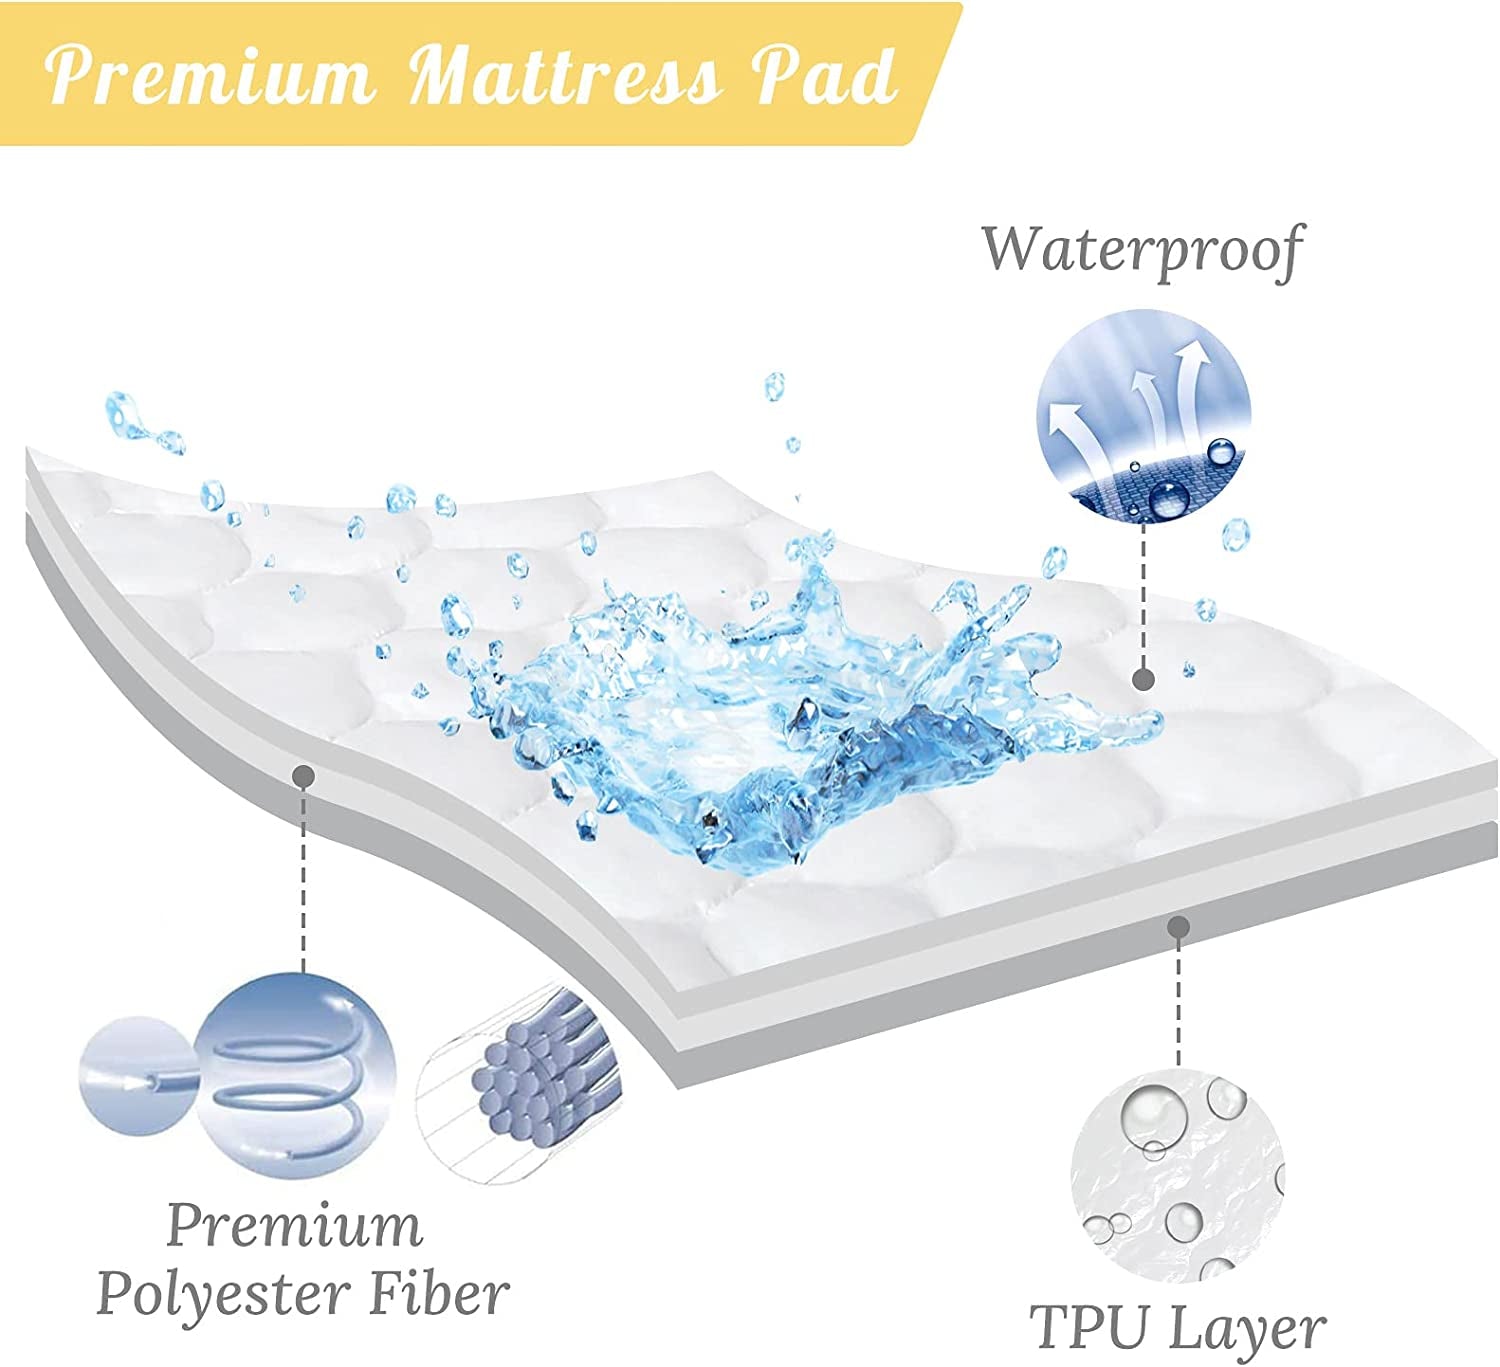 Ayolkhill 100% Waterproof Mattress Pad Queen Size,Breathable Quilted Fitted Fiber Mattress Cover Noiseless,Washable Cooling Mattress Pad with 14-21" Stretchable Deep Pocket